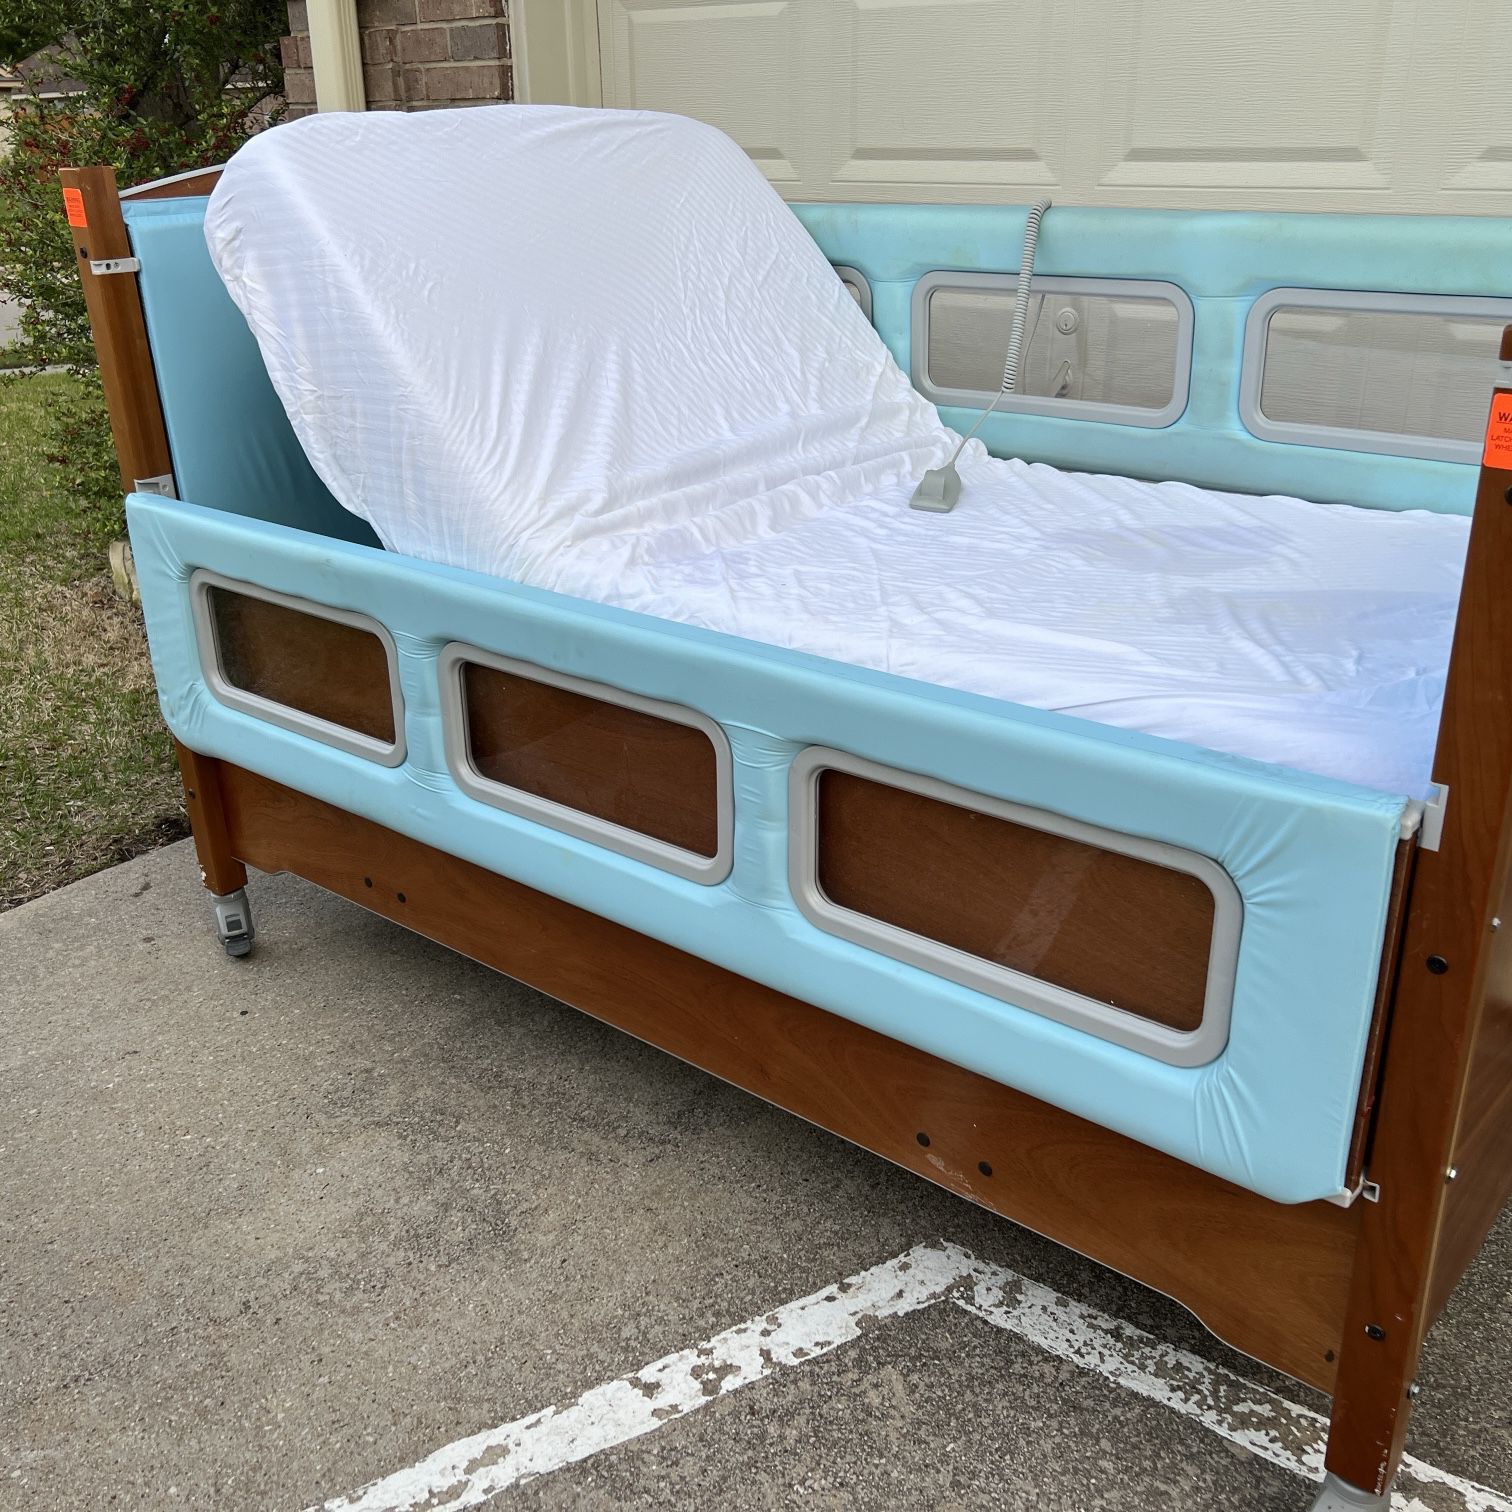 SPECIAL NEEDS ENCLOSED BED